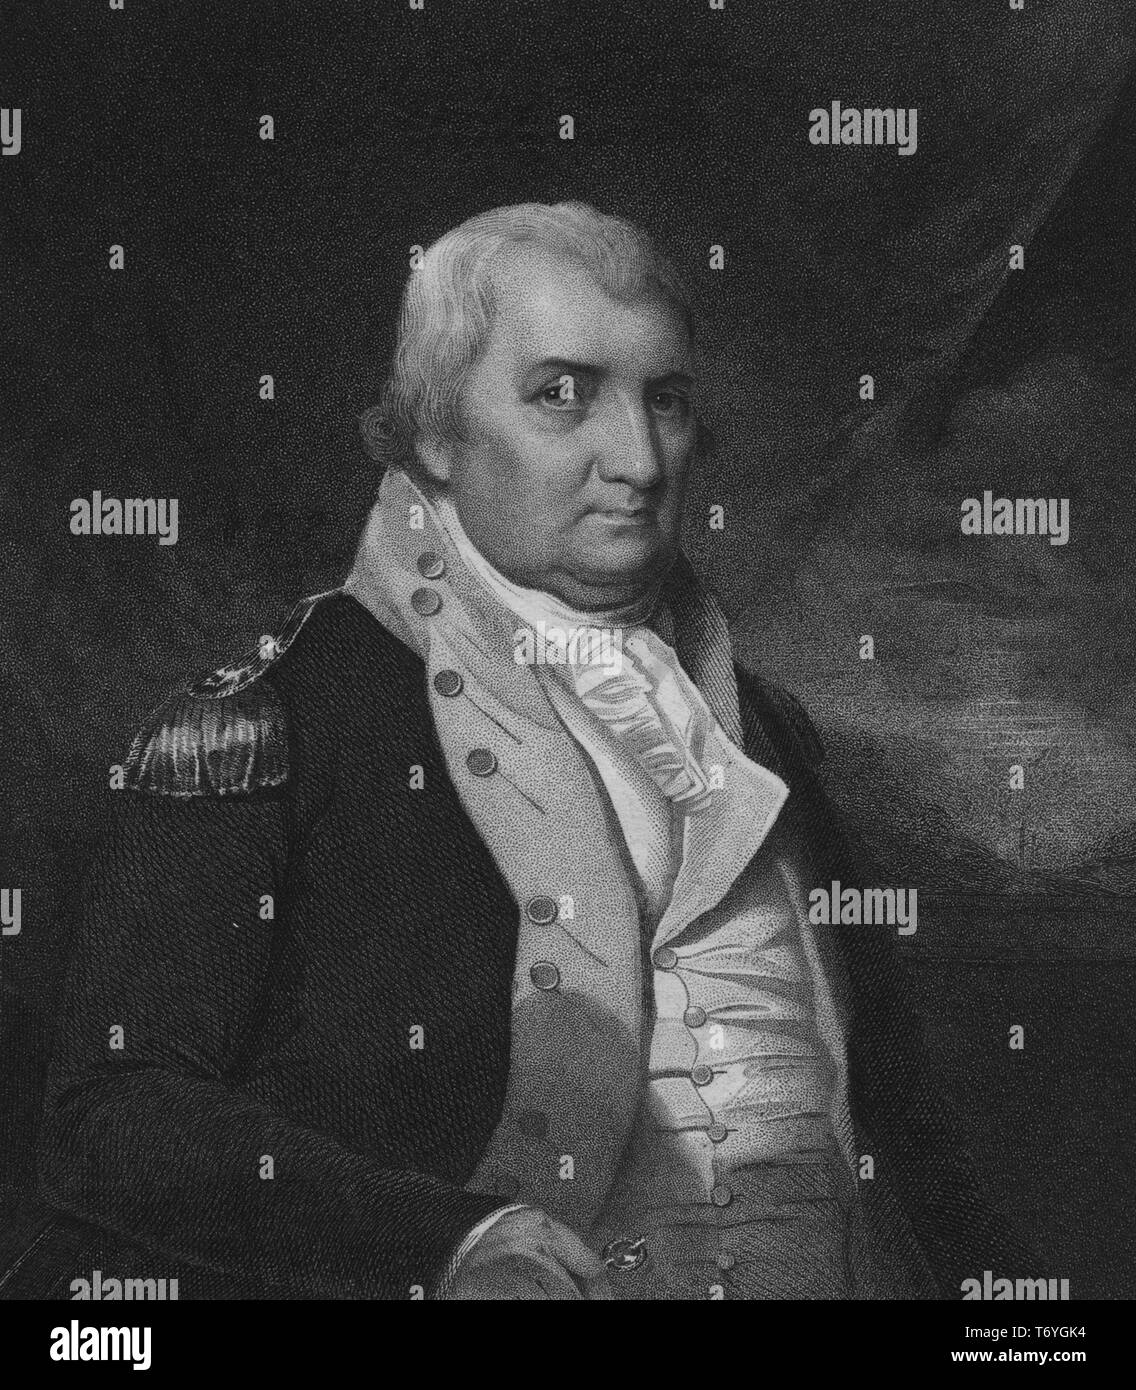 Engraved portrait of Major General Charles Cotesworth Pinckney, delegate to the Constitutional Convention, an American statesman from Charleston, South Carolina, 1800. From the New York Public Library. () Stock Photo